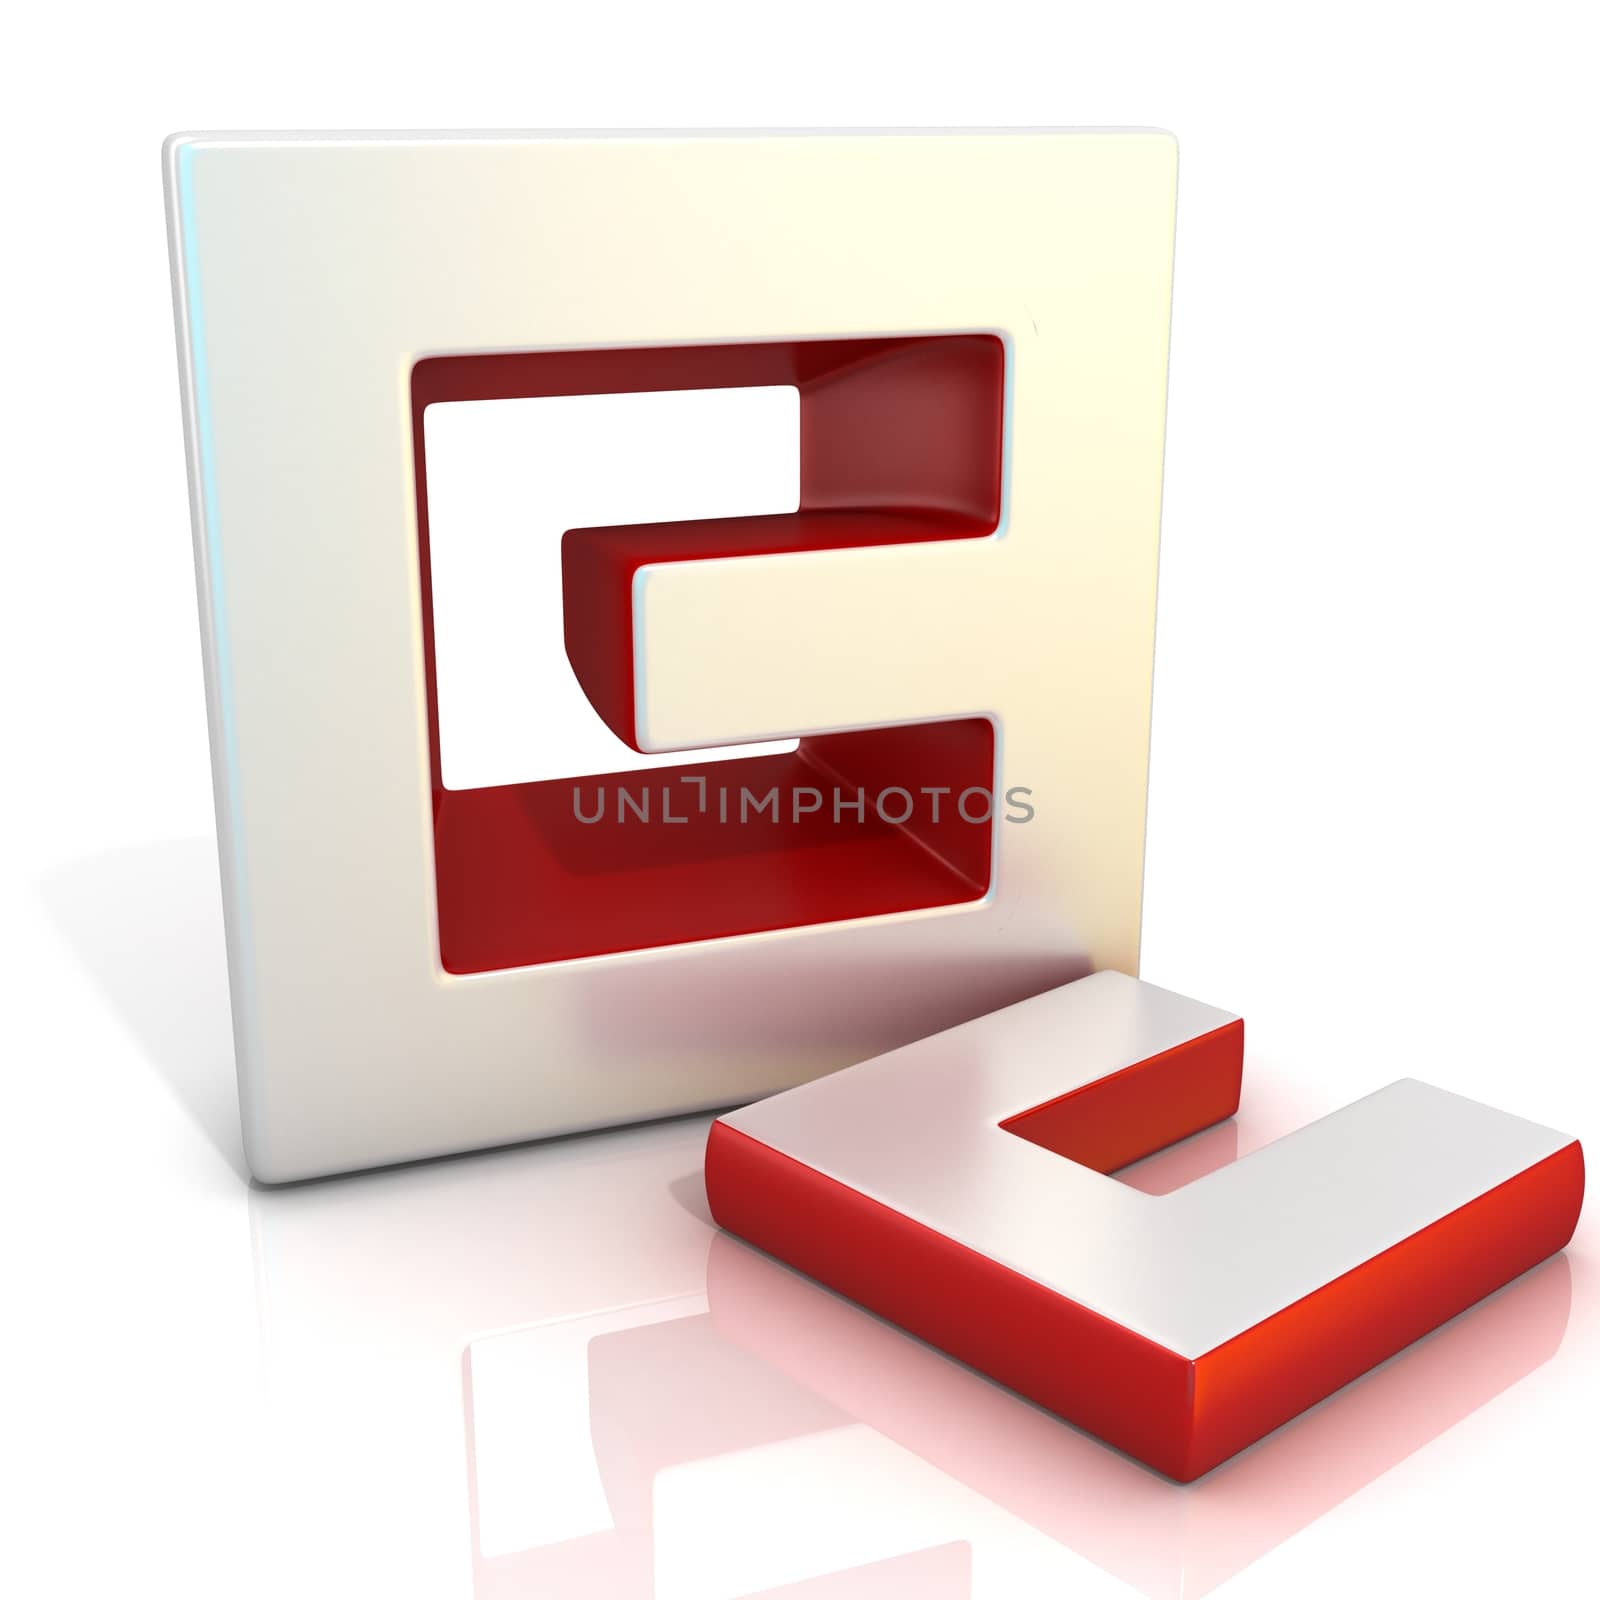 Clear sign. 3D render illustration, isolated on white. Side view